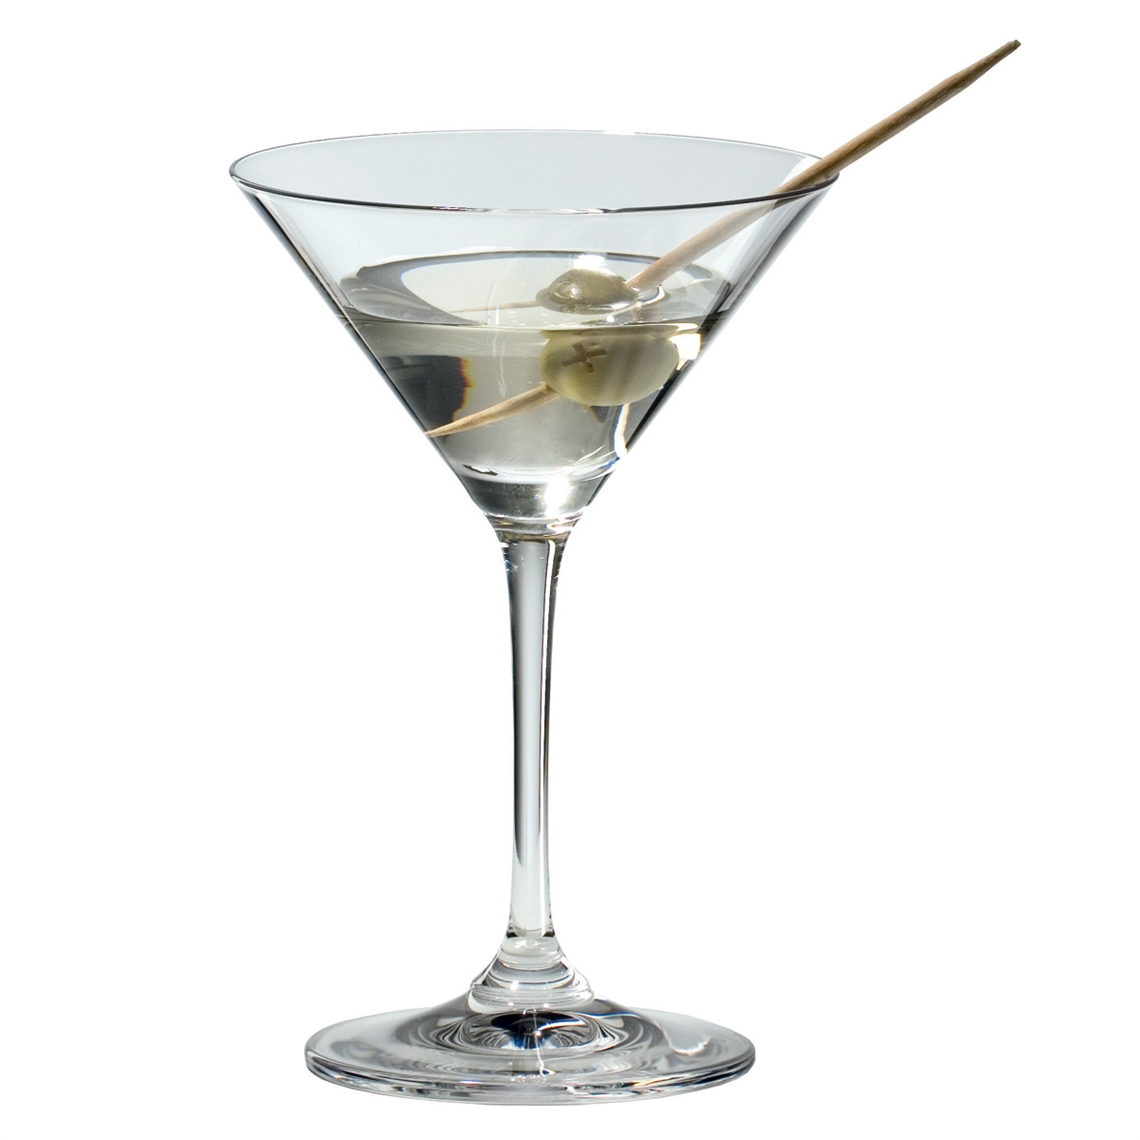 View more wine glasses from our Martini Glasses range